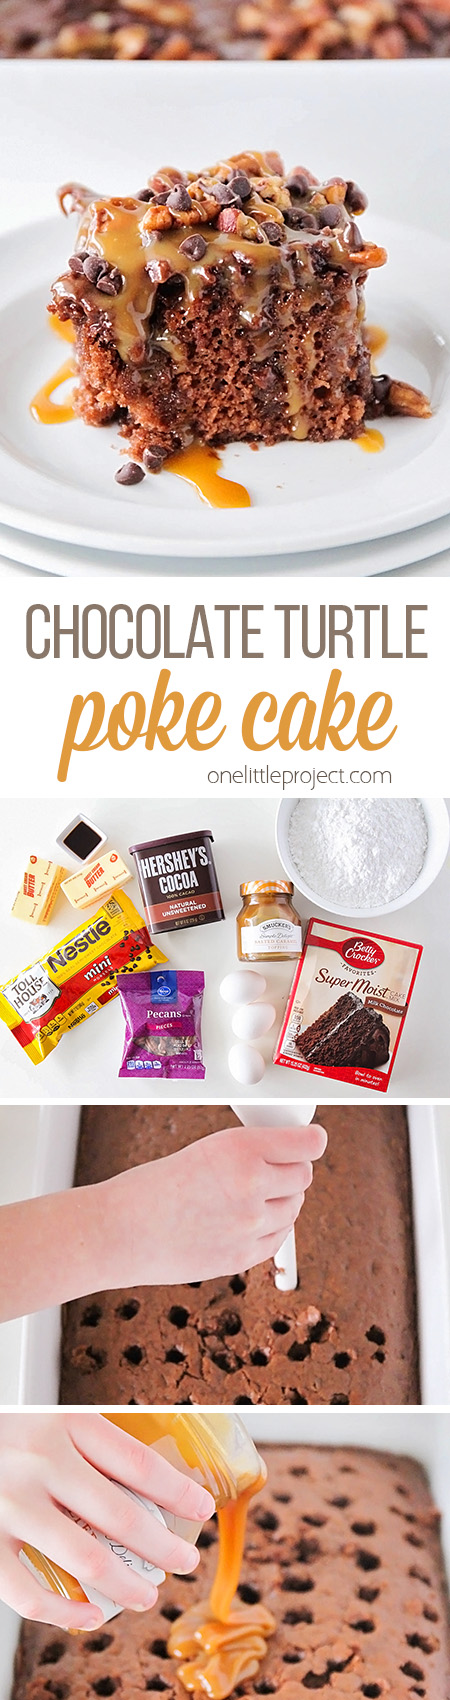 This chocolate turtle poke cake is AMAZING! Delicious and ooey-gooey just loaded with caramel, pecans, and chocolate chips. So yummy and so easy to make!